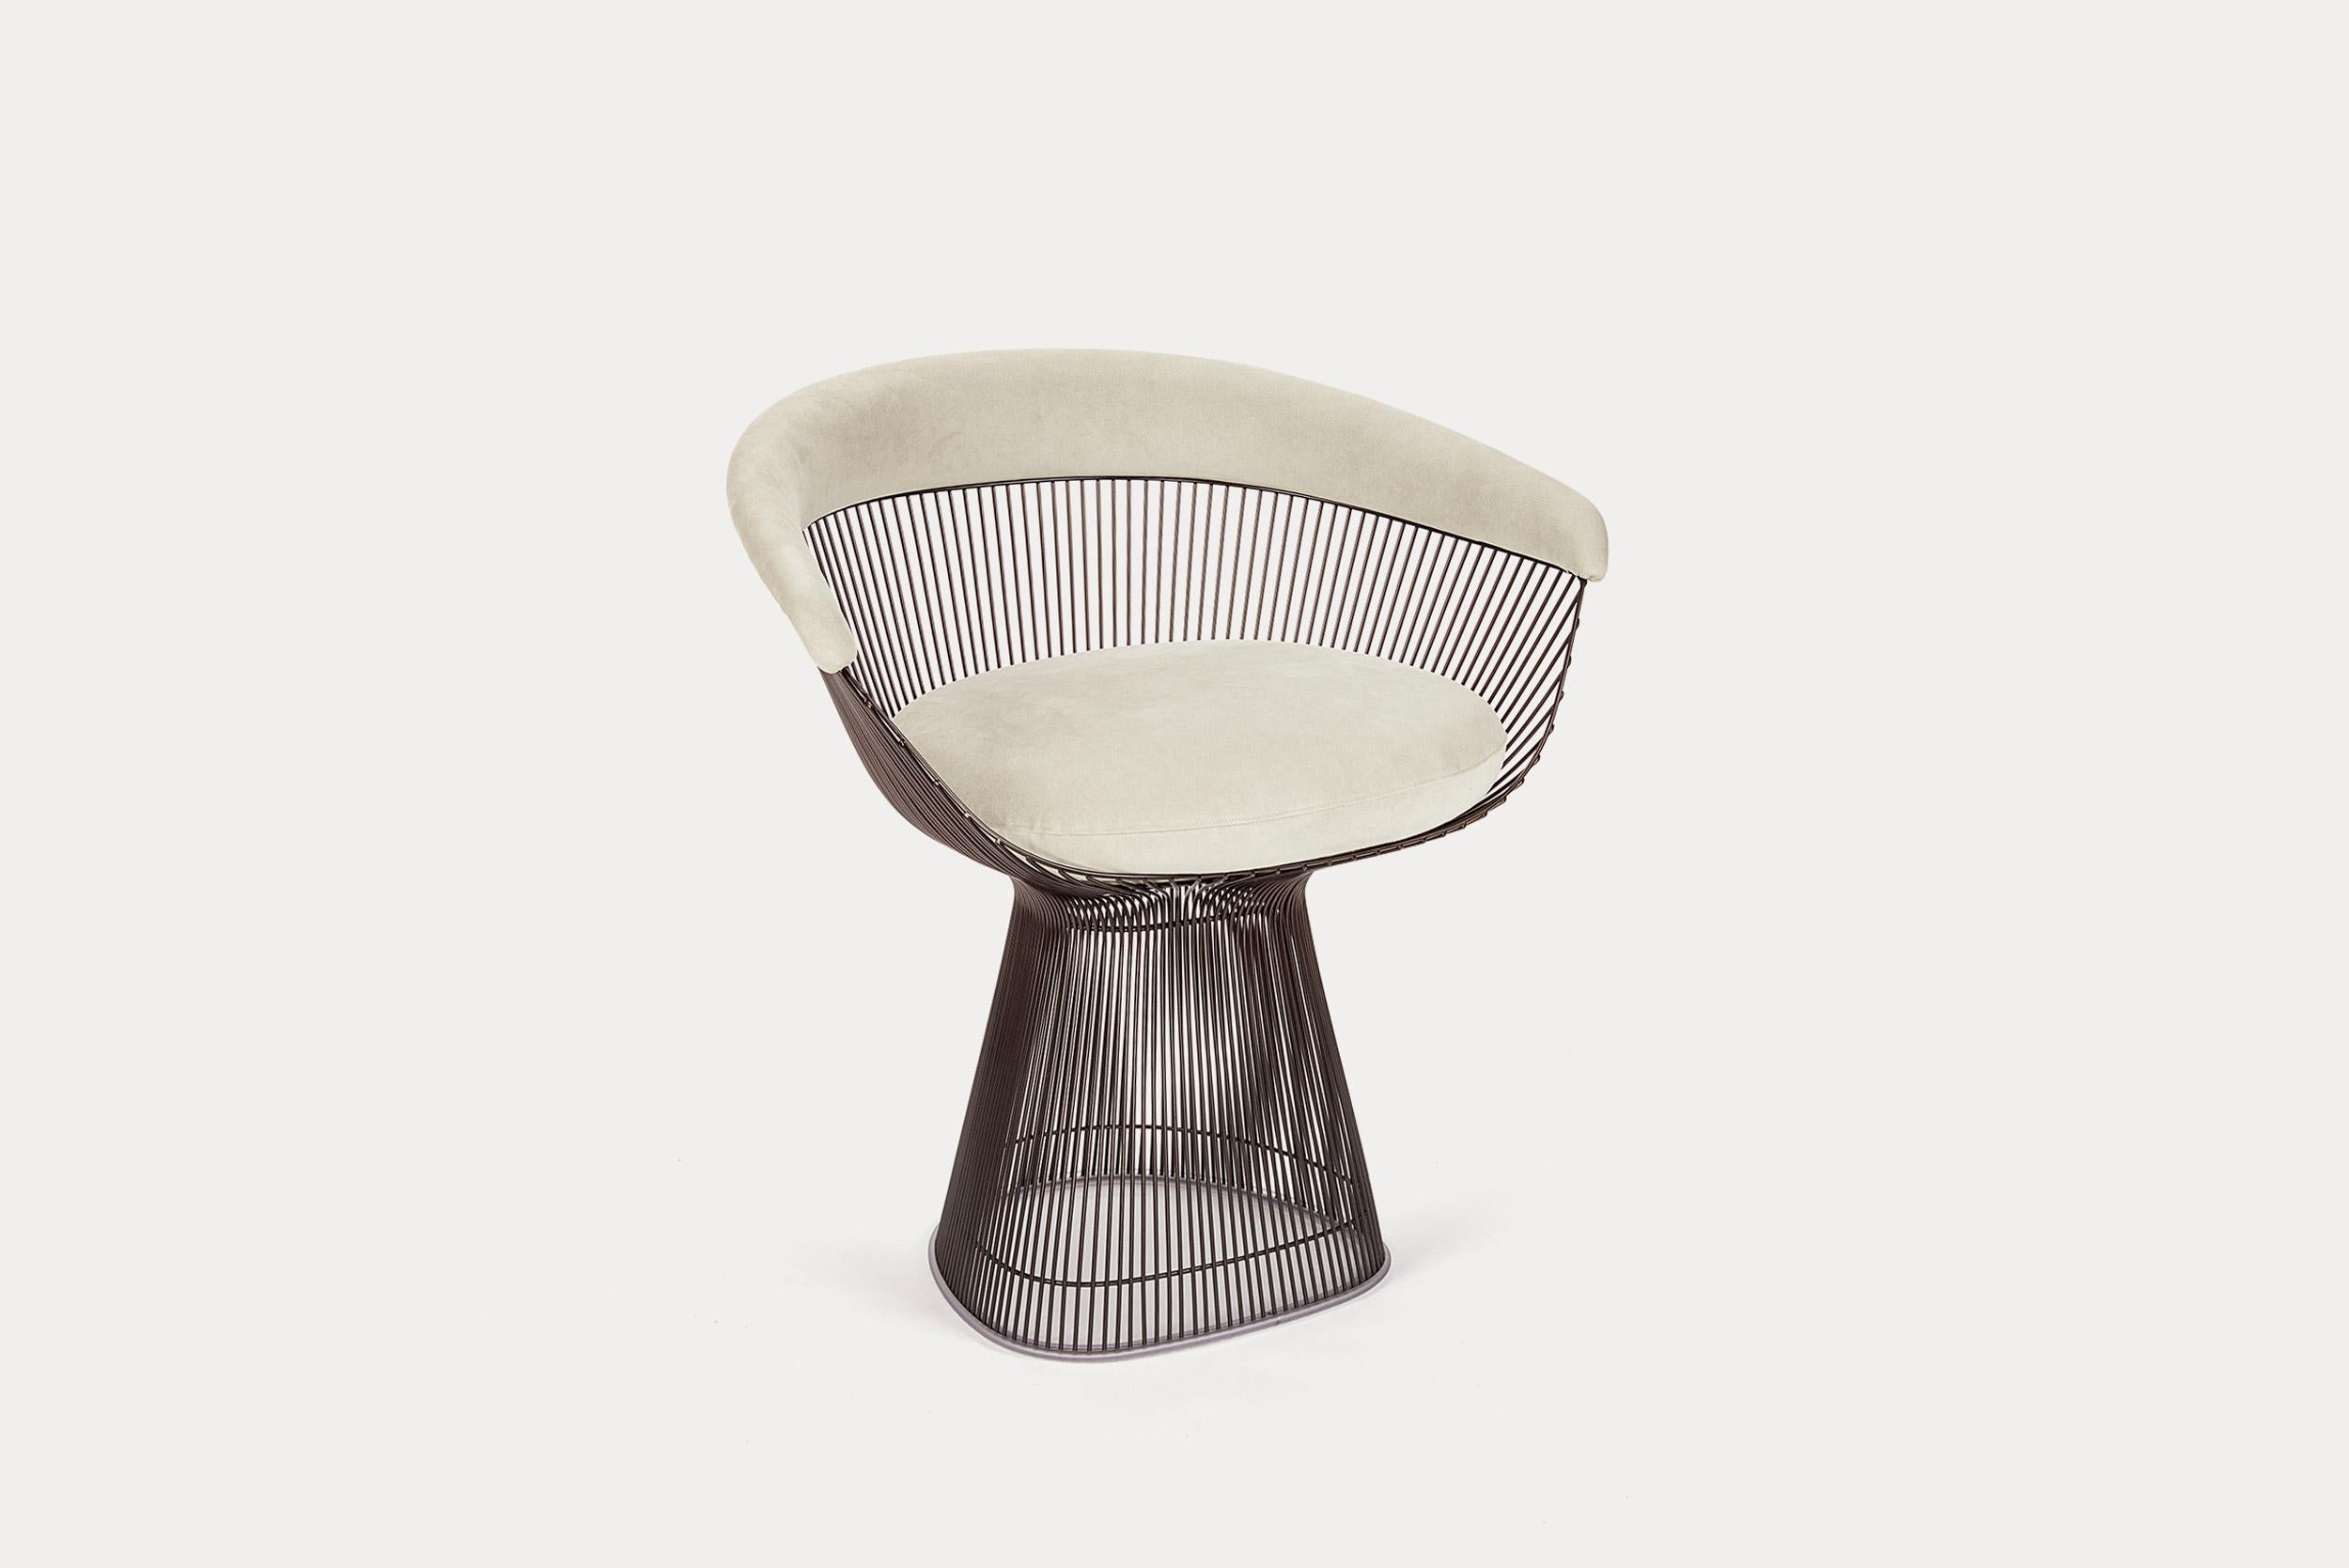 Knoll Platner armchair with Ultrasuede upholstery and bronze metallic base. This chair is a classic statement for any environment.